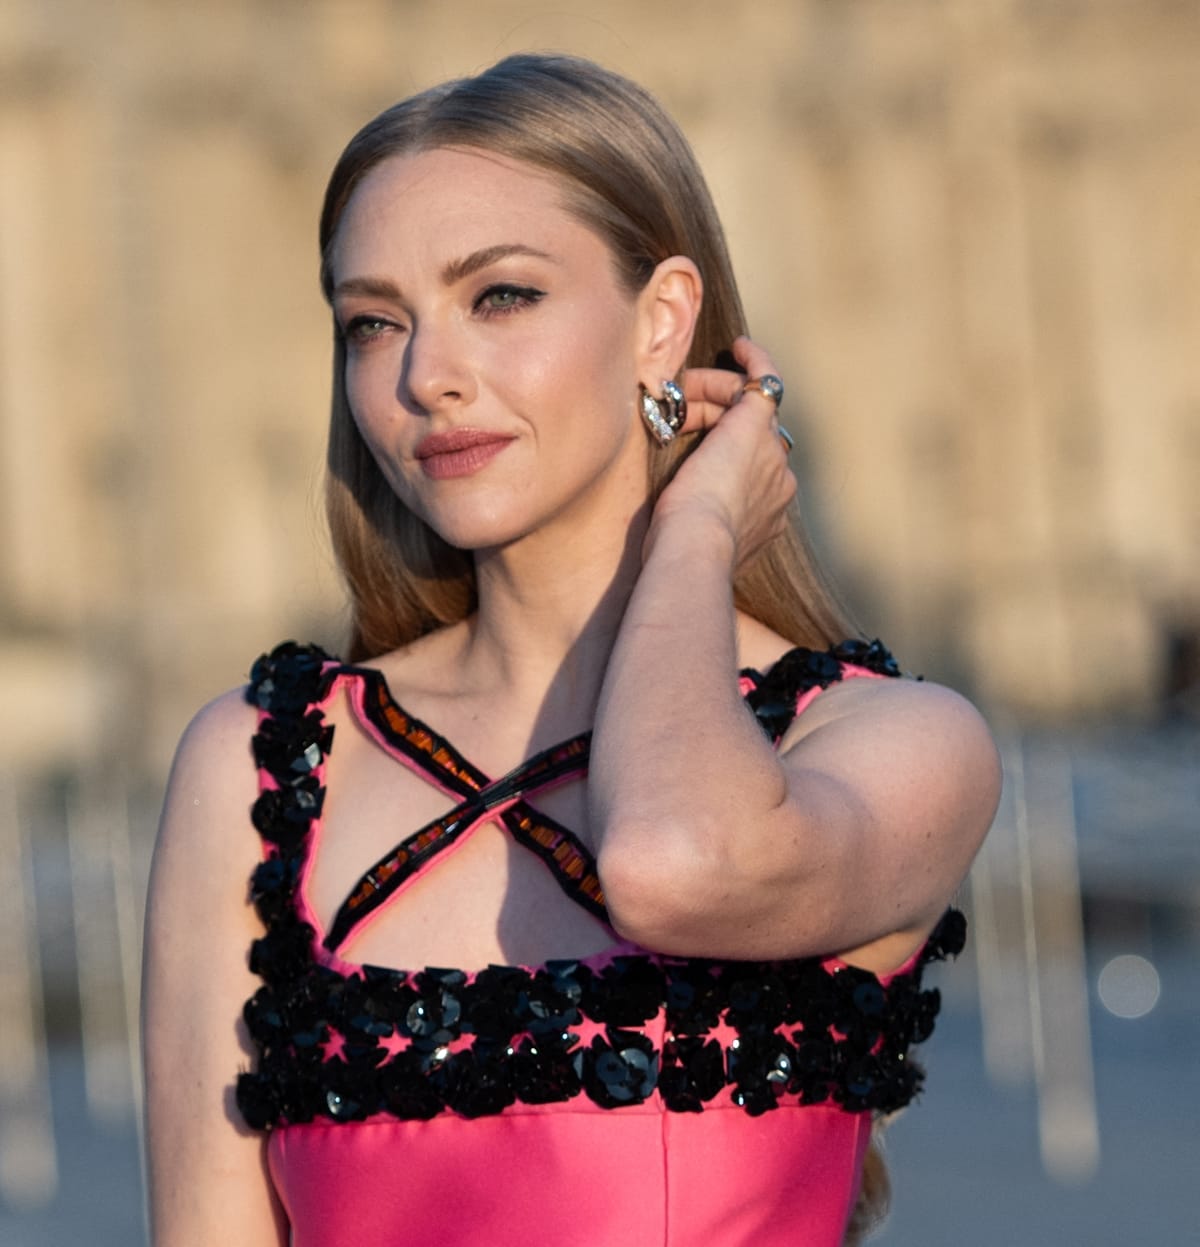 Adorned with Tabayer's Oera hoop earrings and diamond ring, Amanda Seyfried complements her vibrant Prada gown with sophisticated jewelry choices at the Lancome X Louvre photocall as part of Paris Fashion Week on September 26, 2023 in Paris, France